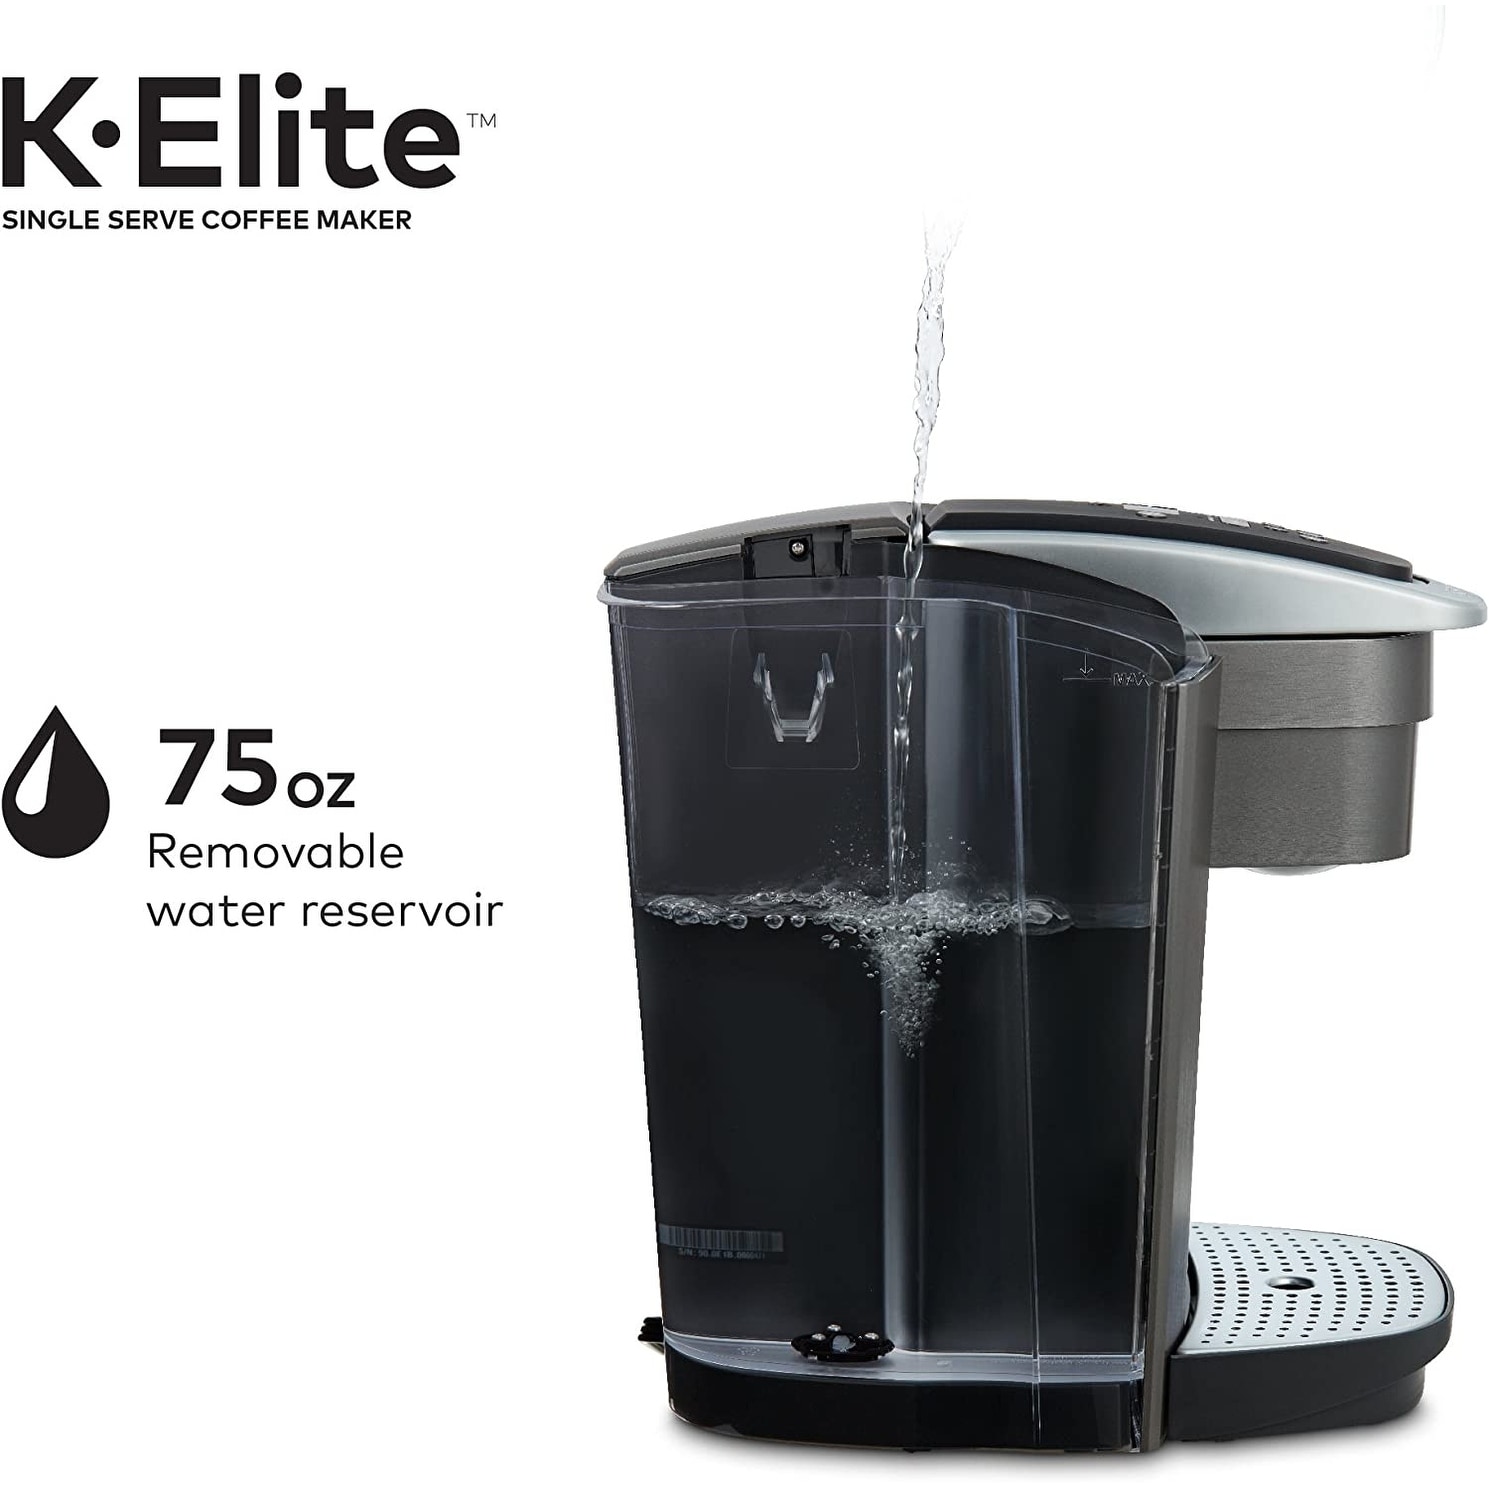 https://ak1.ostkcdn.com/images/products/is/images/direct/bd8f193c1f6fe7c7450e08820e3808b0406972f4/Keurig-K-Elite-Coffee-Maker%2C-Single-Serve-K-Cup-Pod-Coffee-Brewer%2C-With-Iced-Coffee-Capability.jpg